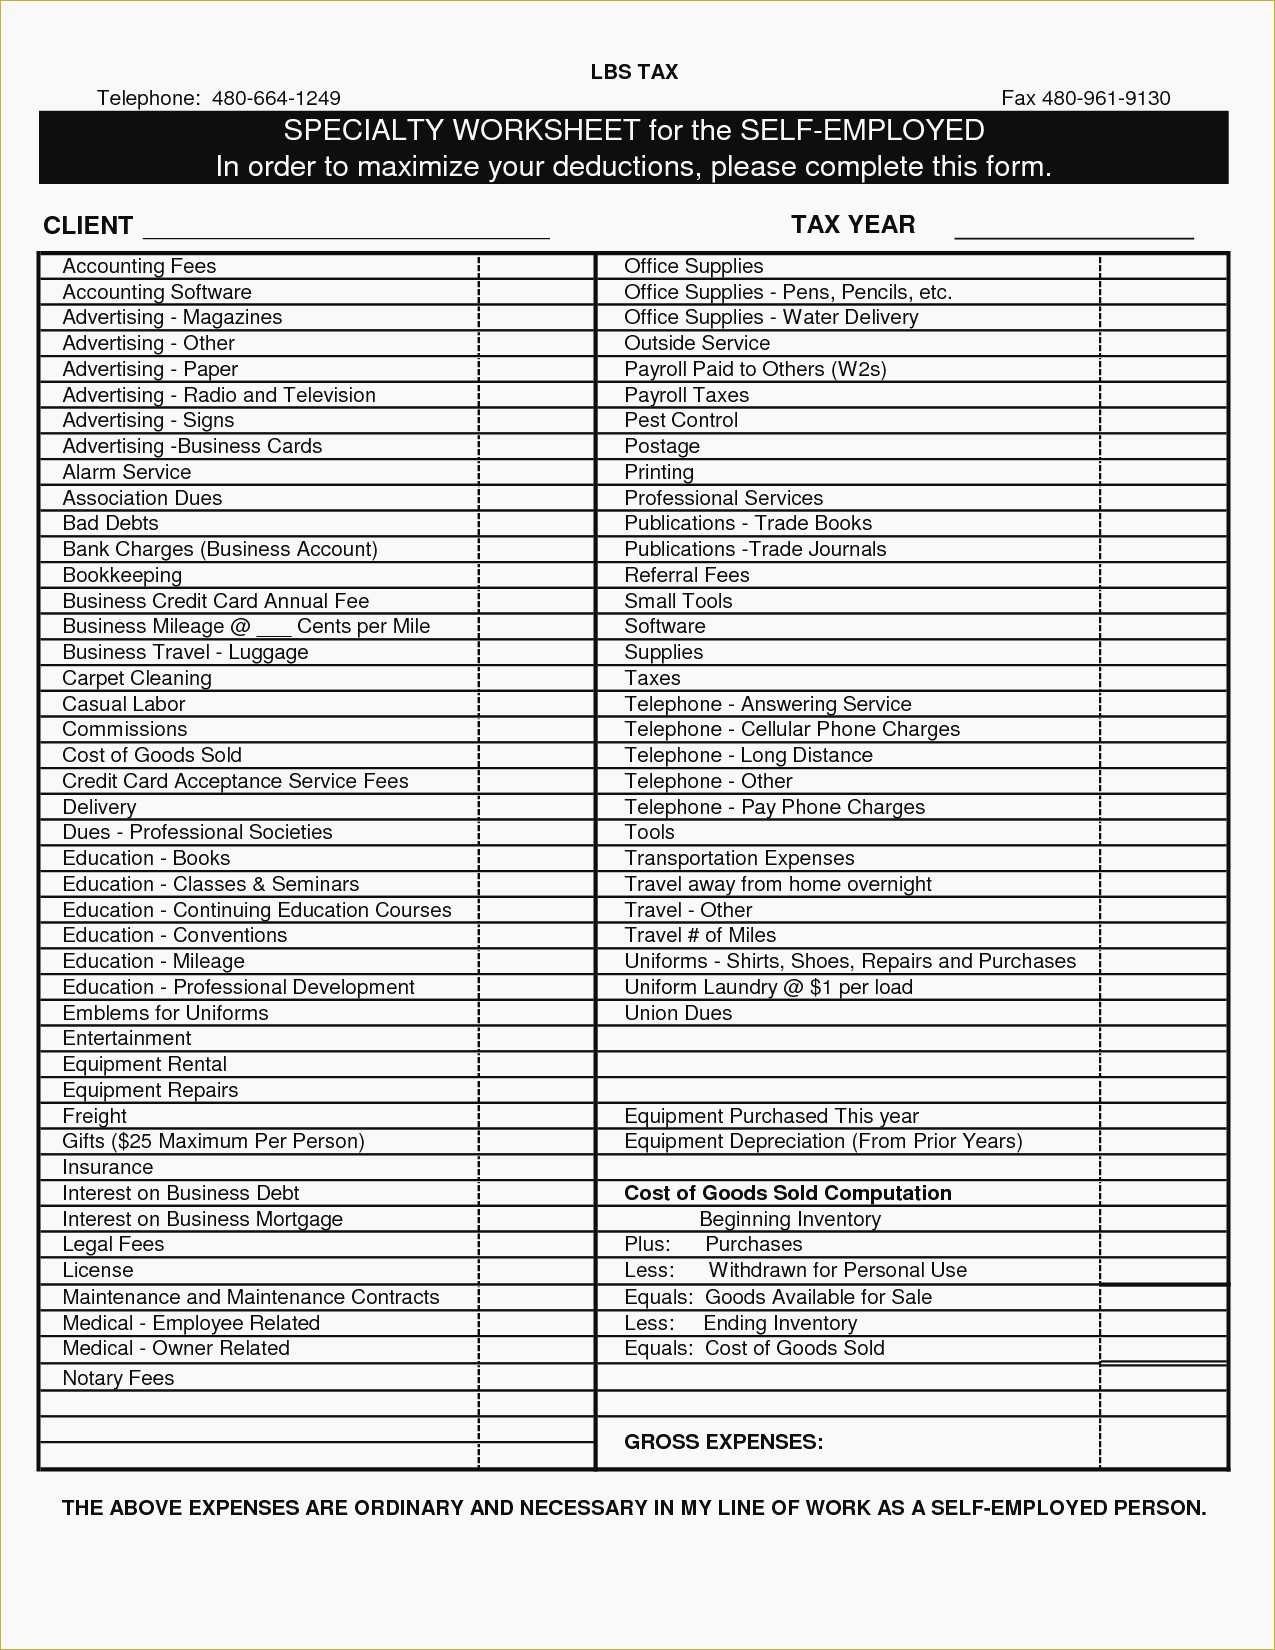 Itemized Deductions Worksheet with Truck Driver Tax Deductions Worksheet